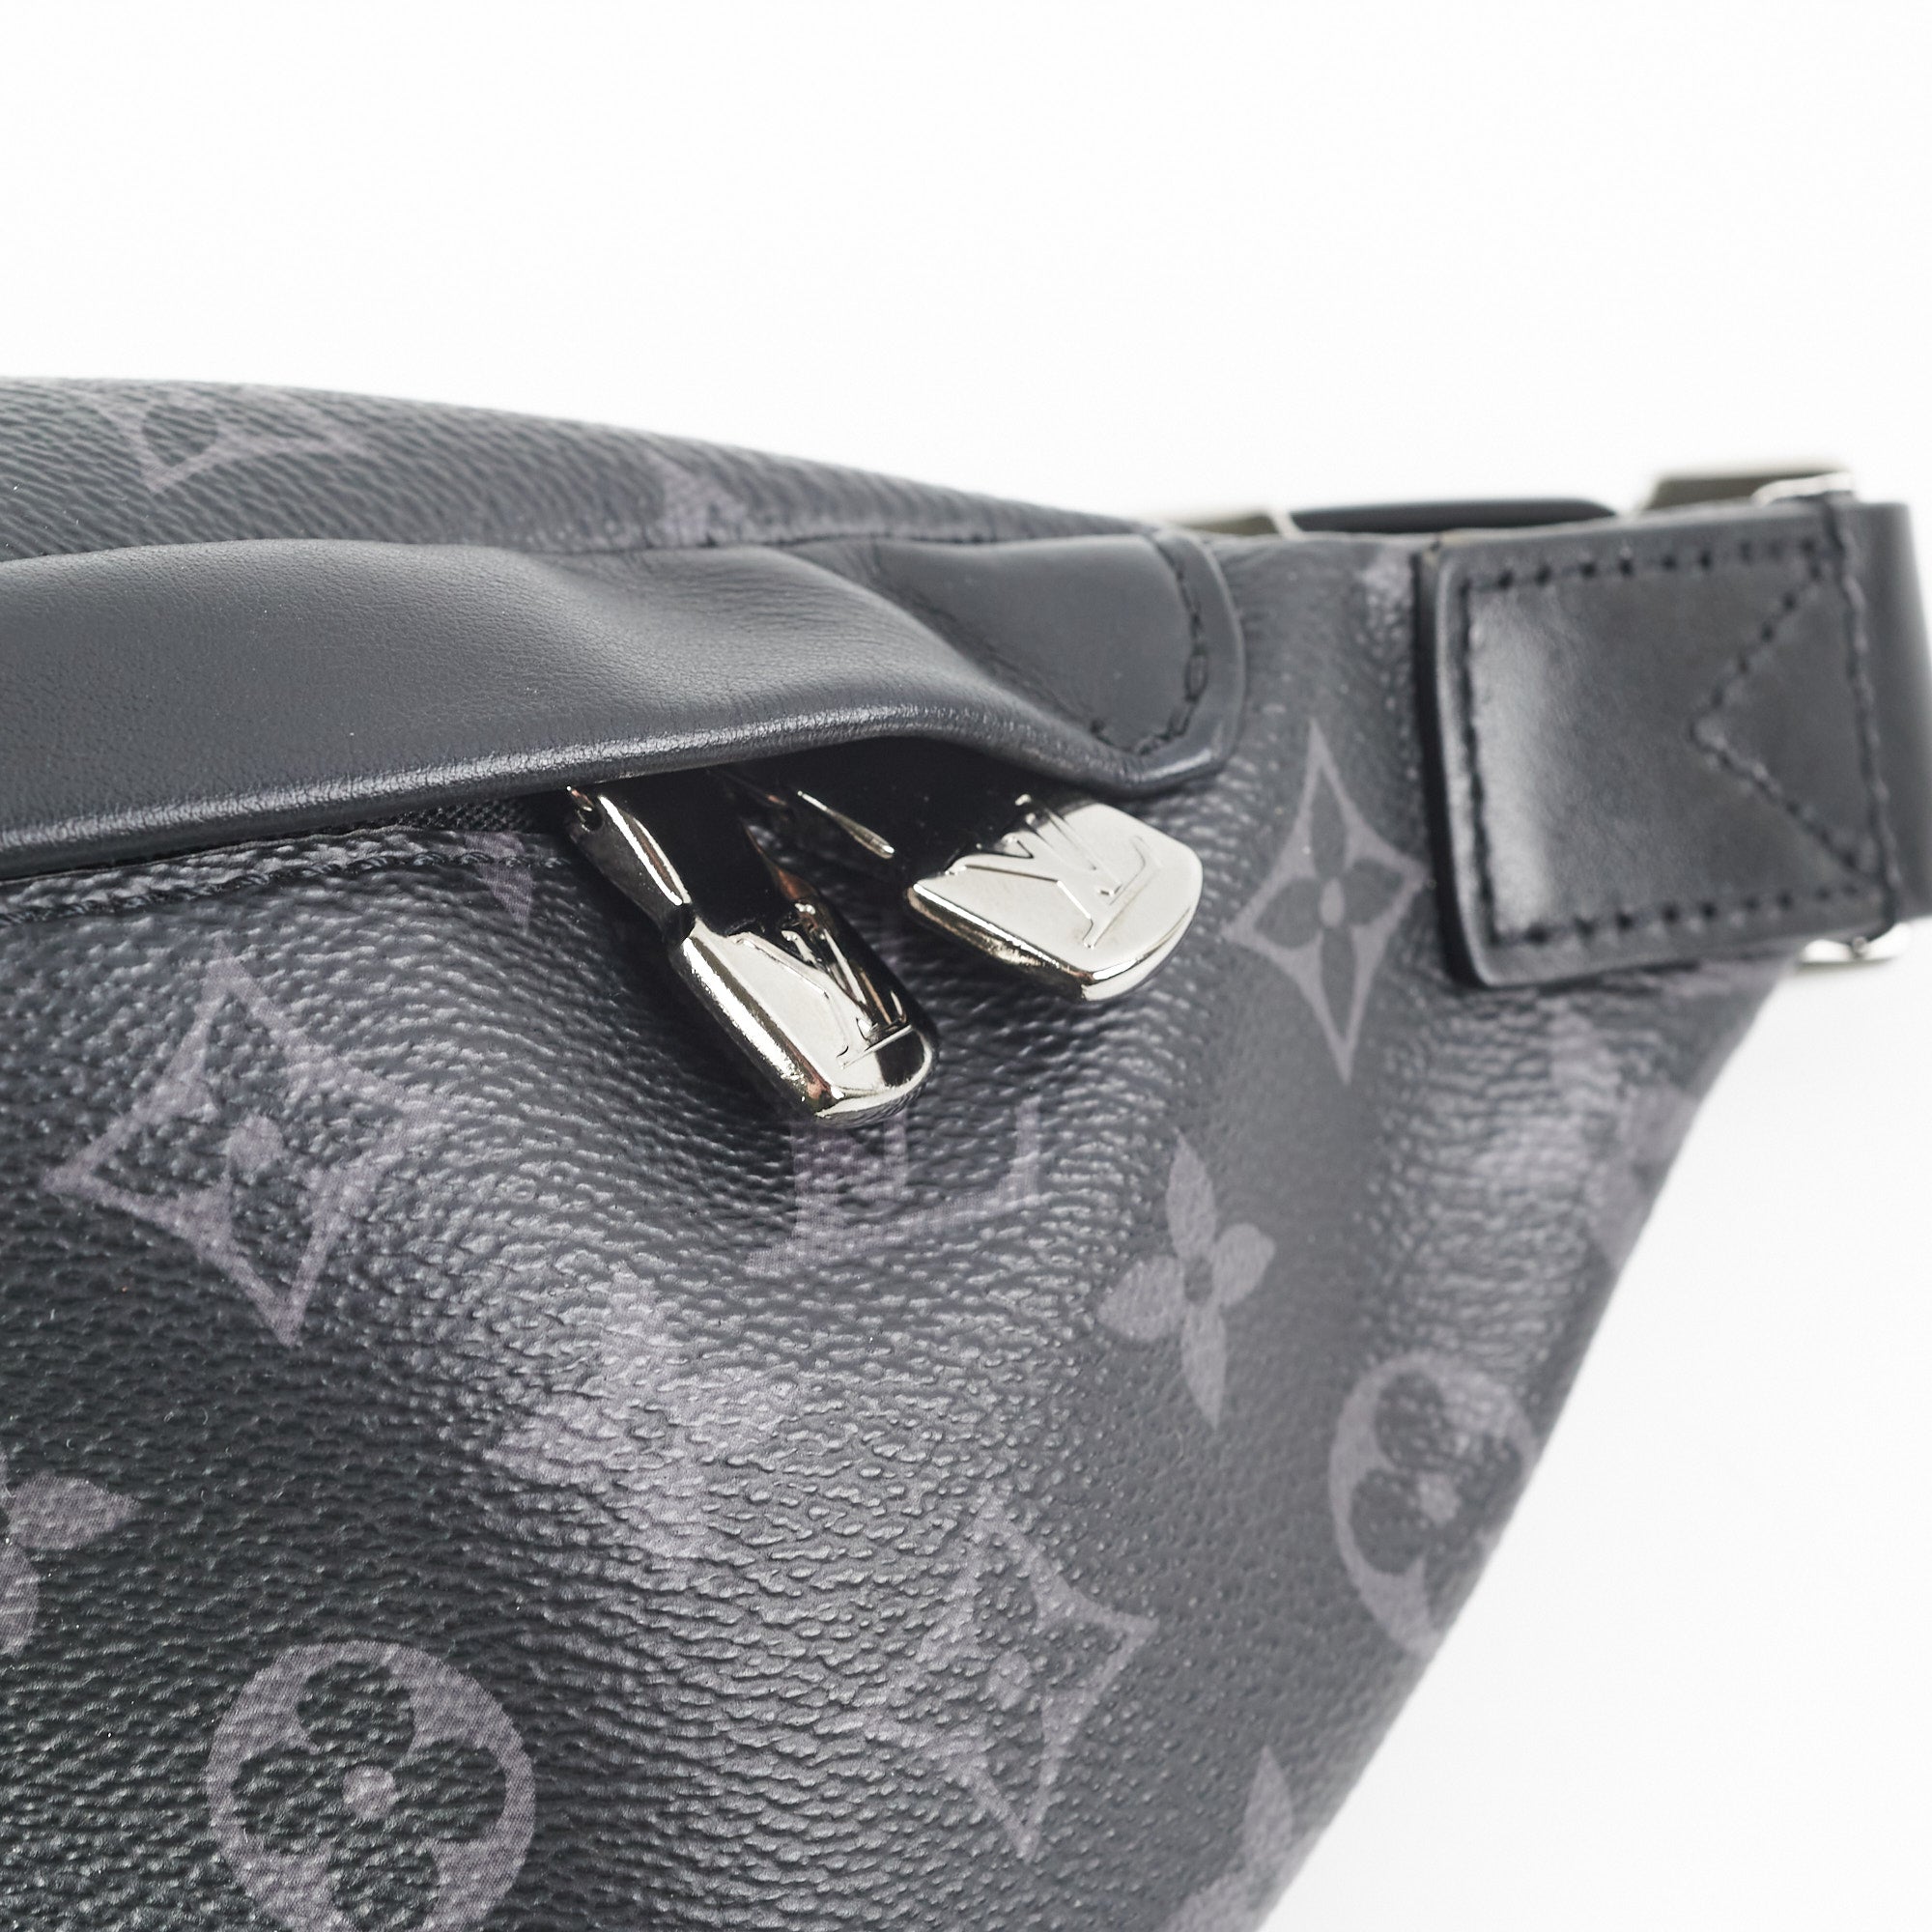 Shop Louis Vuitton Discovery Discovery bumbag pm (M46036) by Bellaris